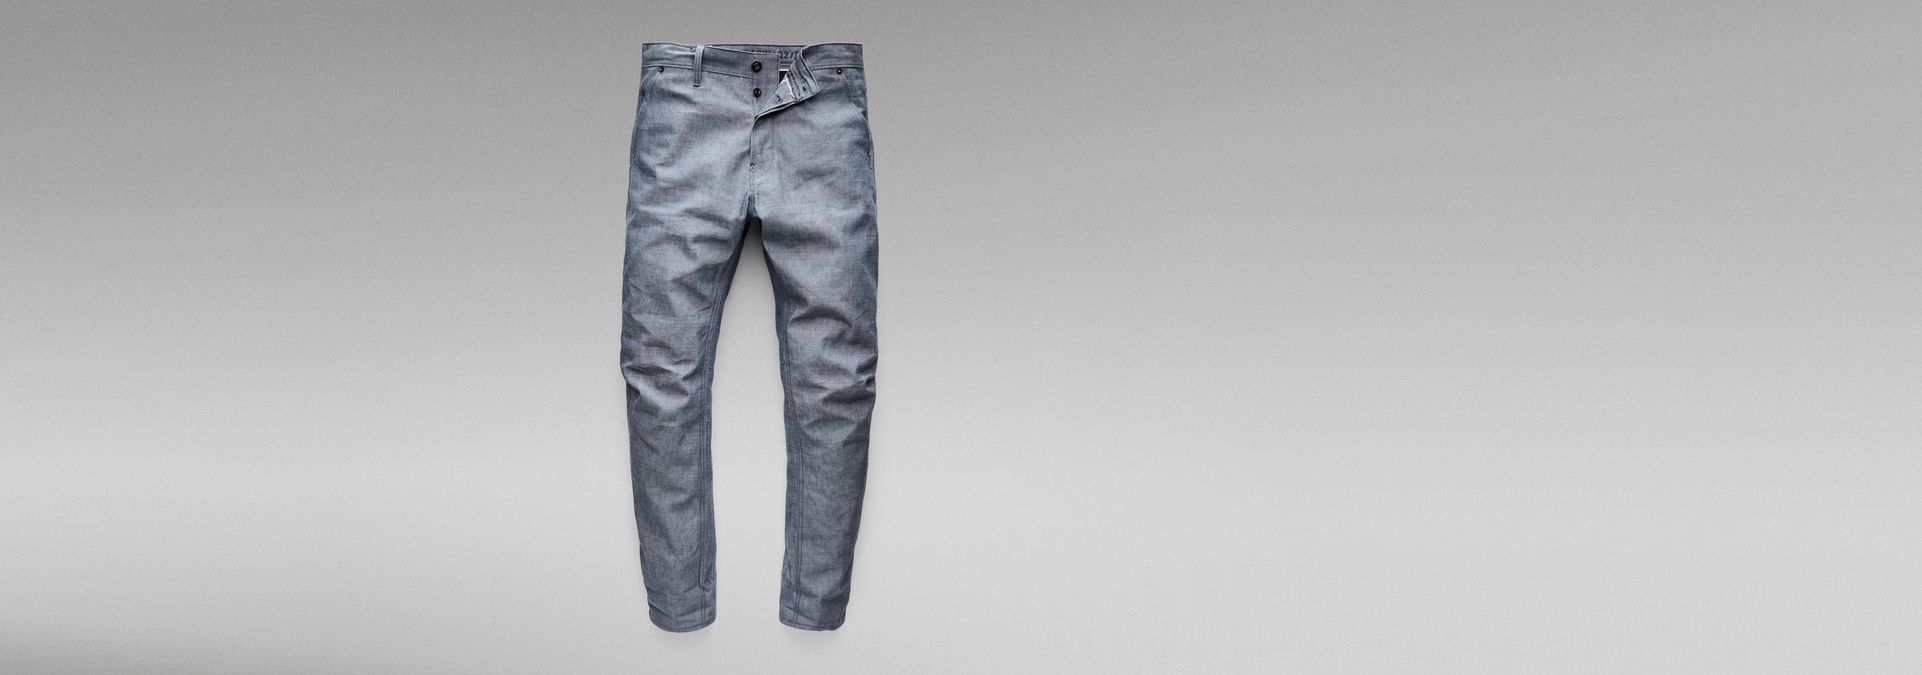 GSRR Grip 3D Relaxed Tapered Jeans | Dark blue | G-Star RAW®